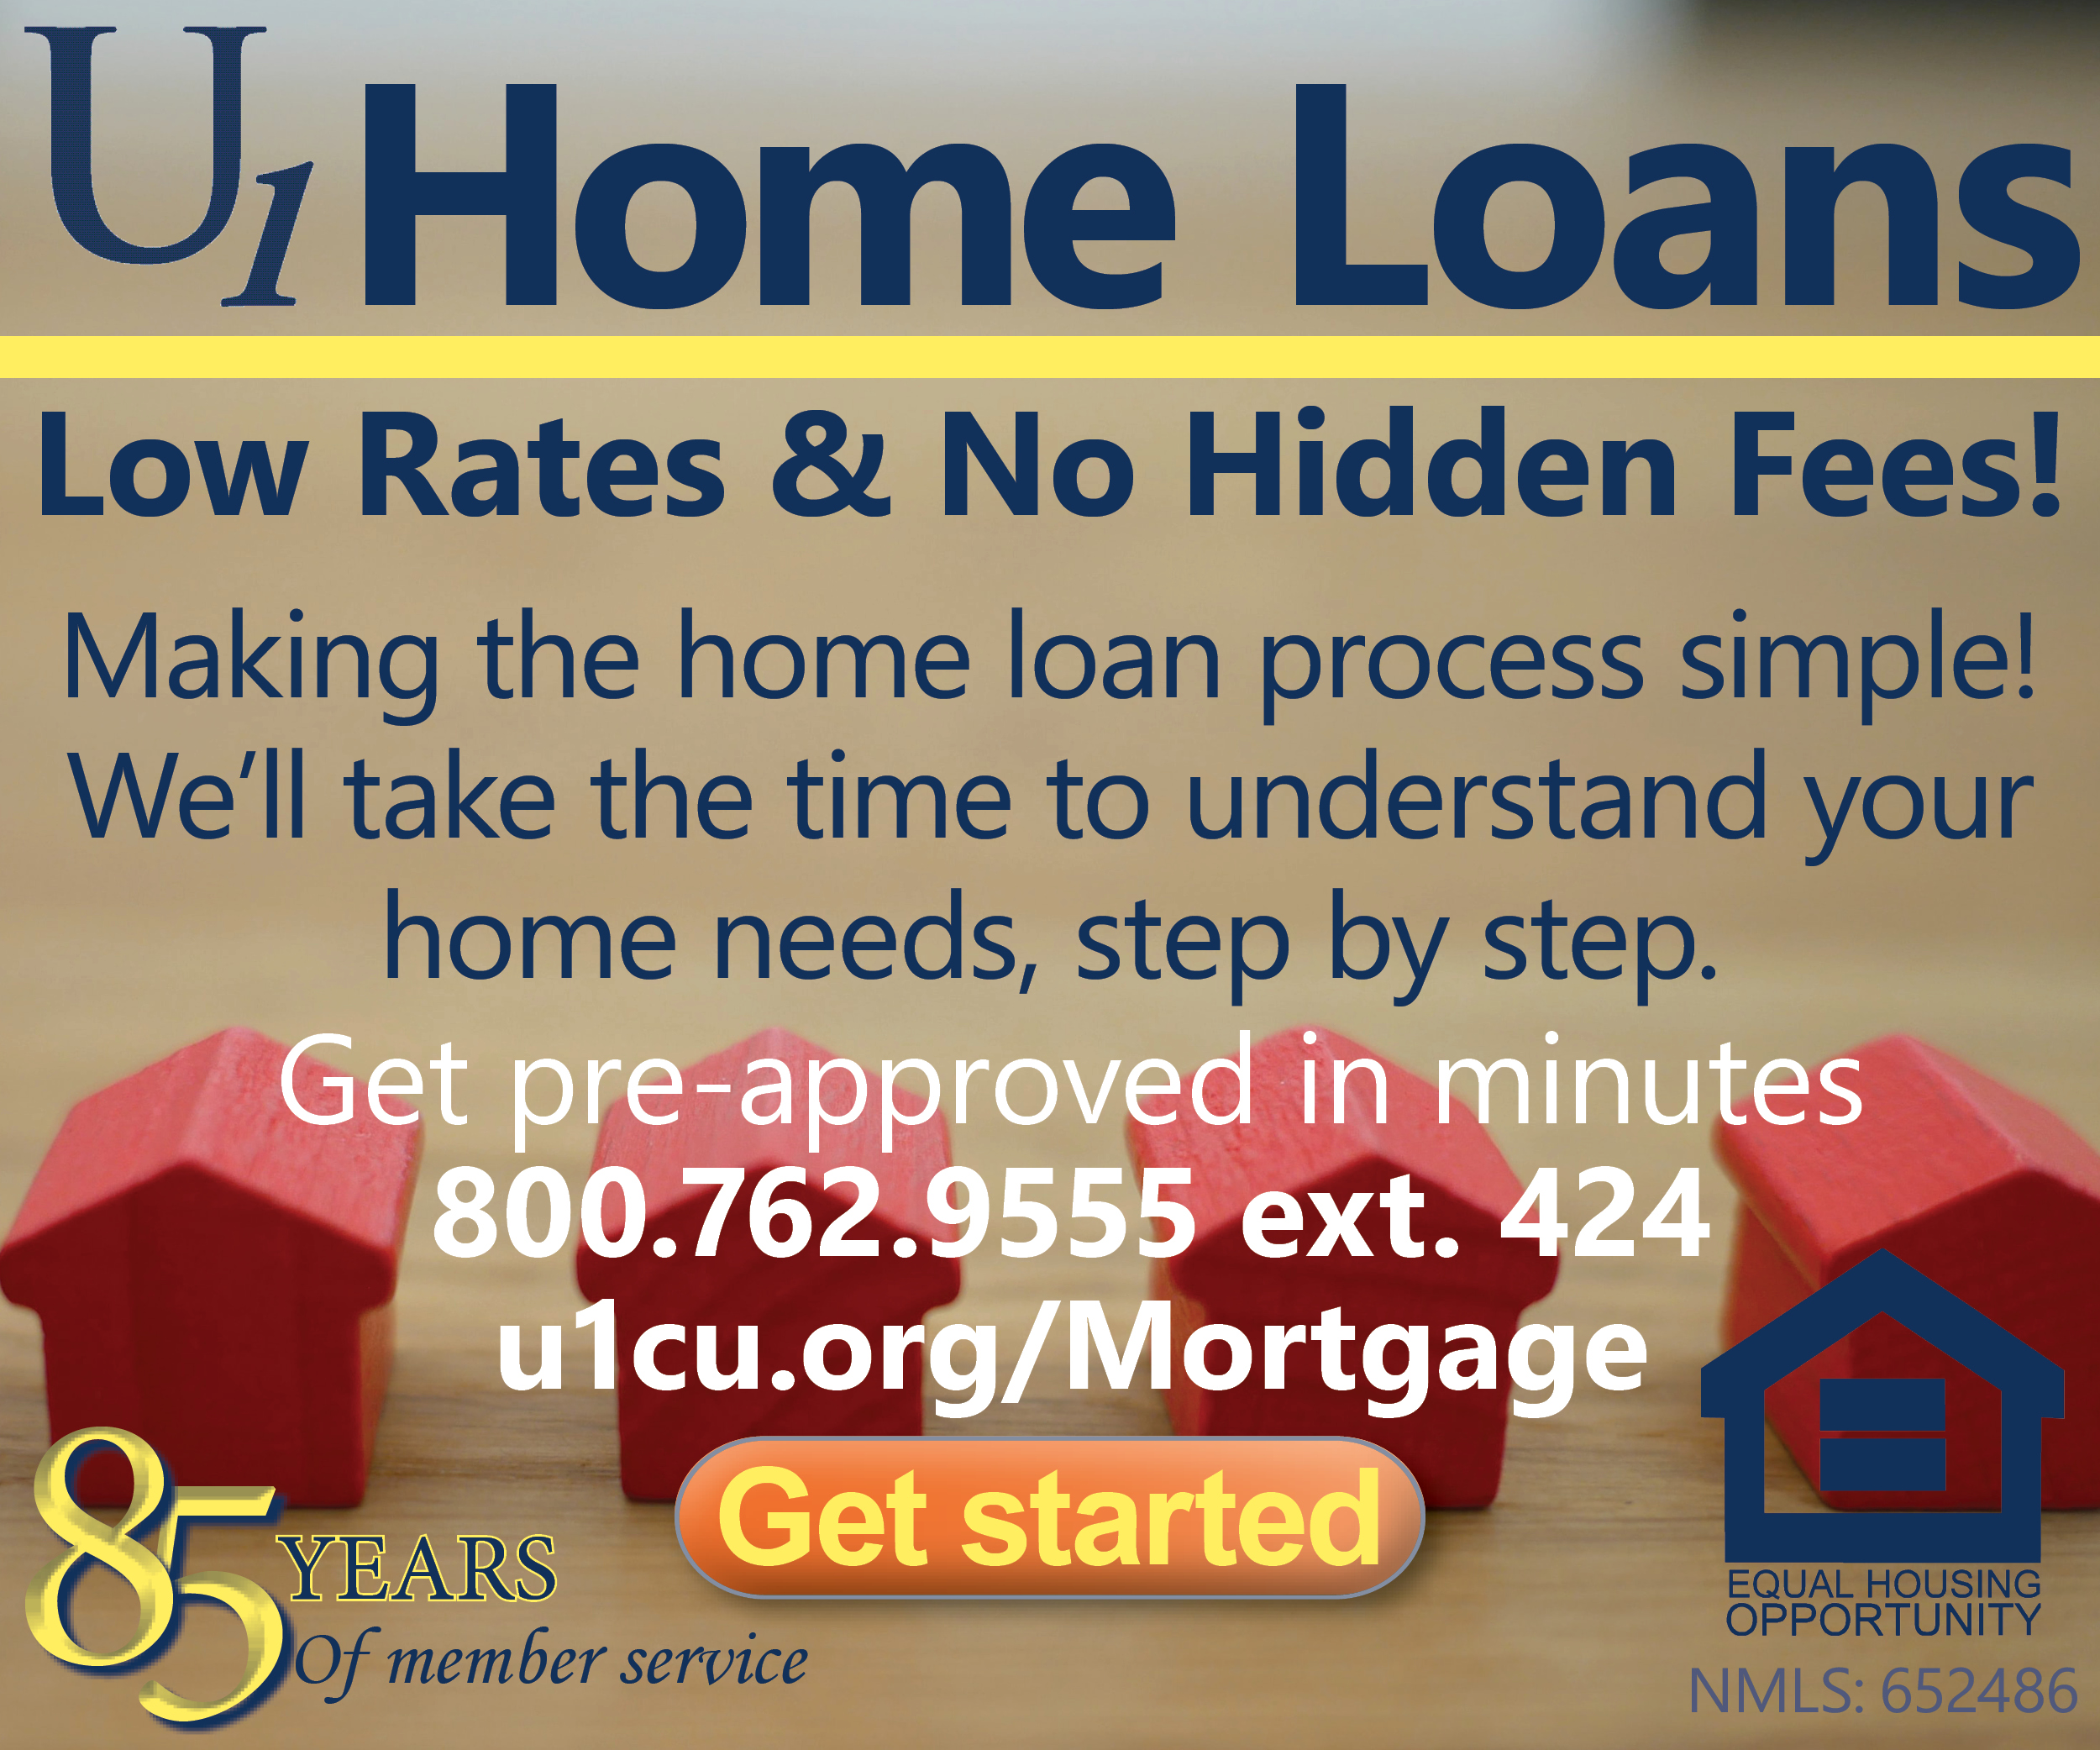 Universal 1 Home Loans Made Simple. Apply Today!